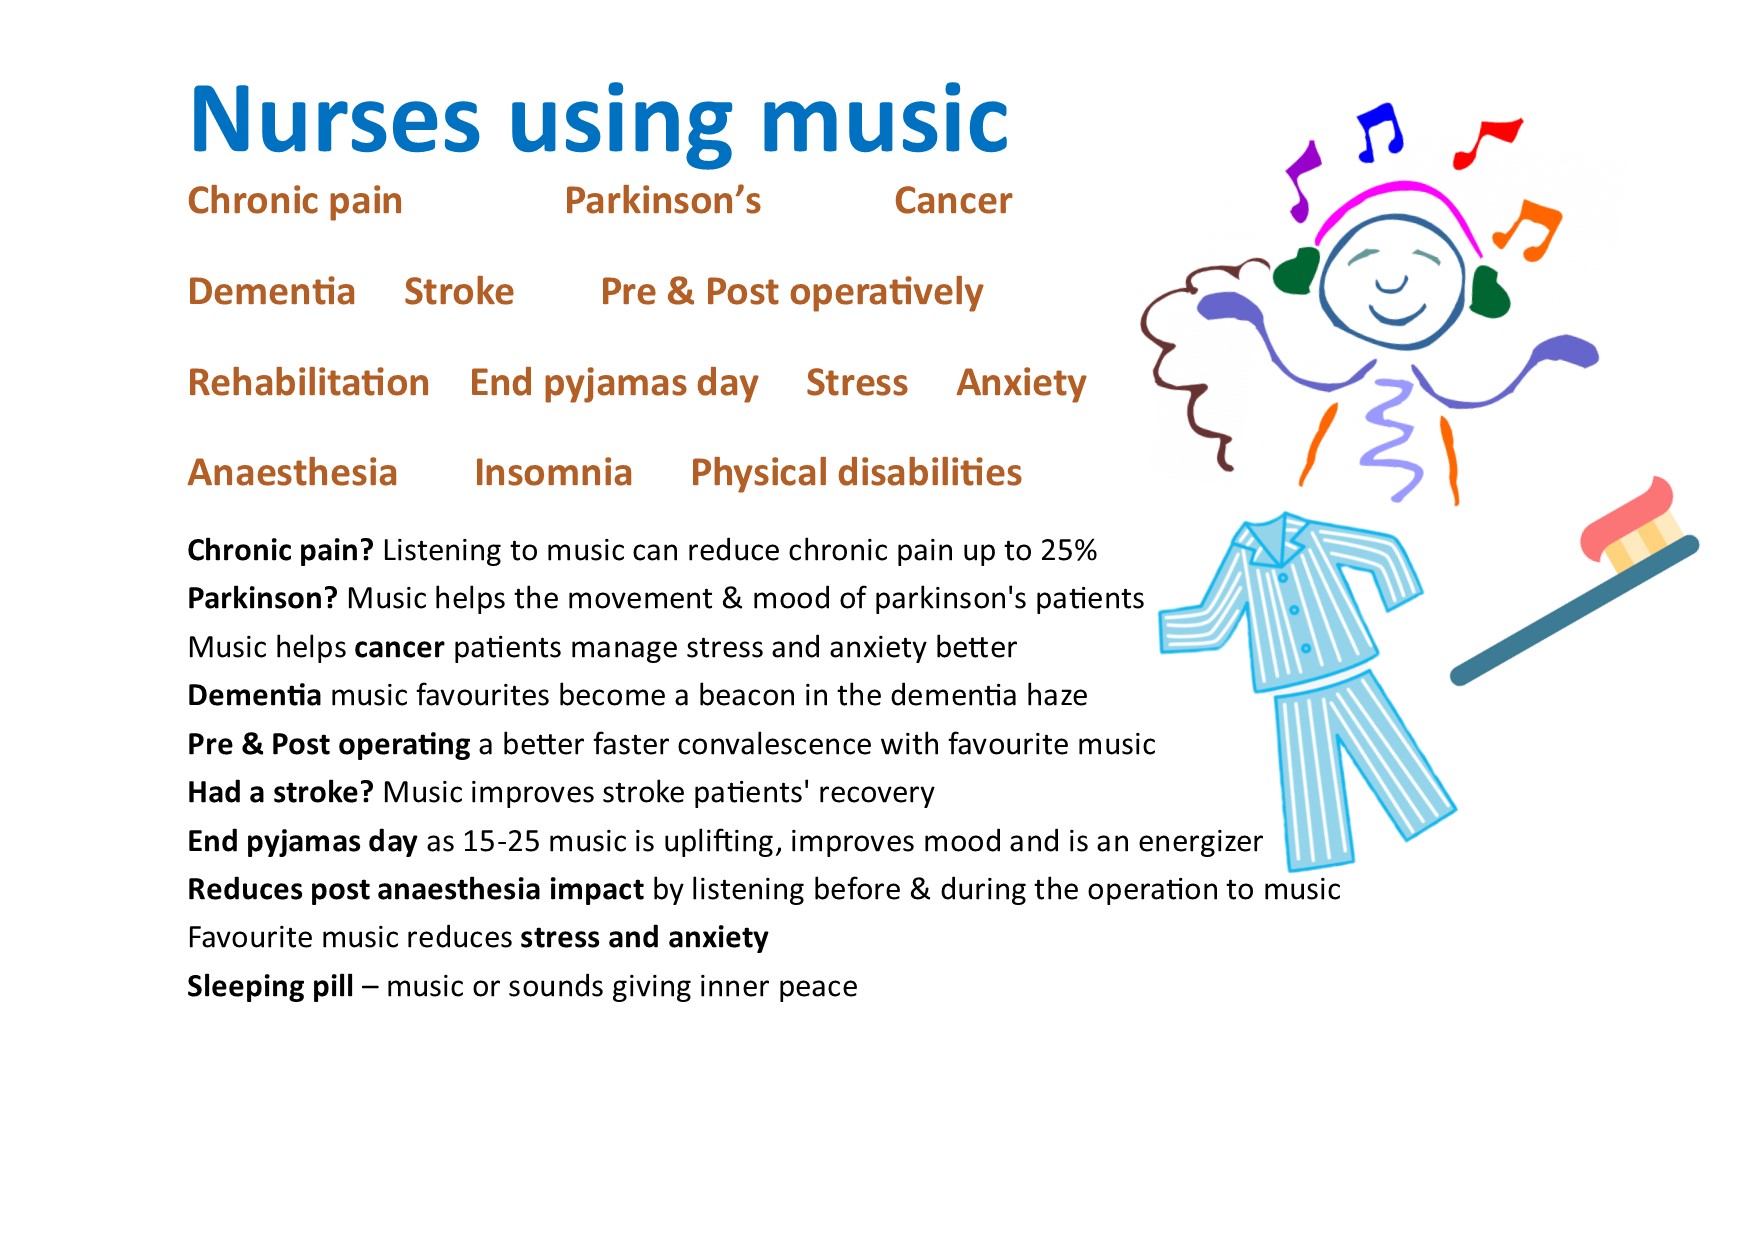 Nurses using the power of music in care featured image